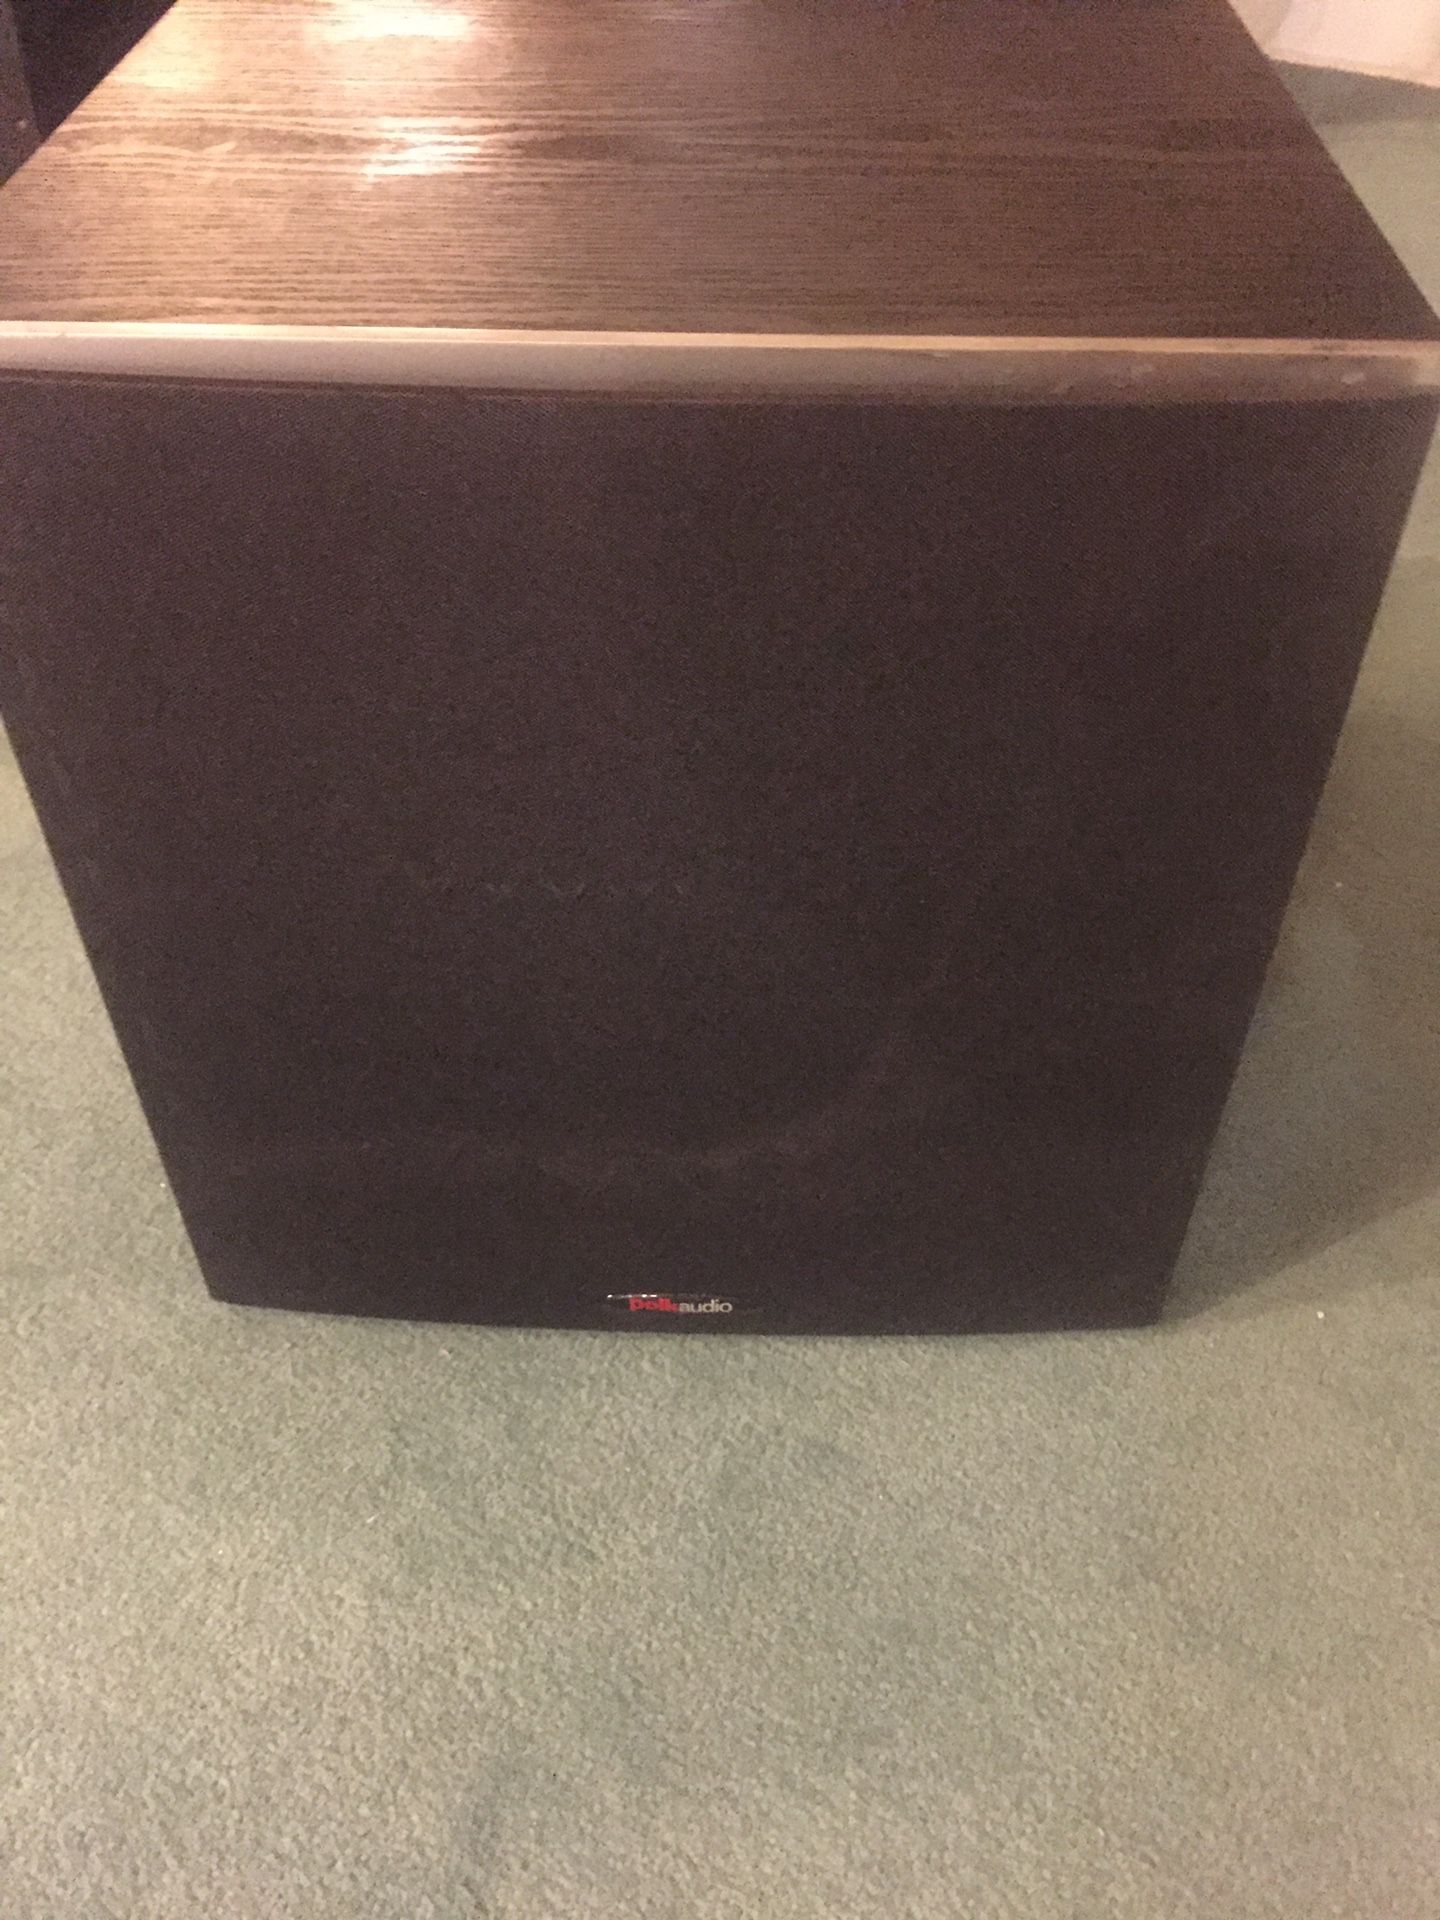 Polk Audio PWs10 Power subwoofer and 5) rm7 Speakers